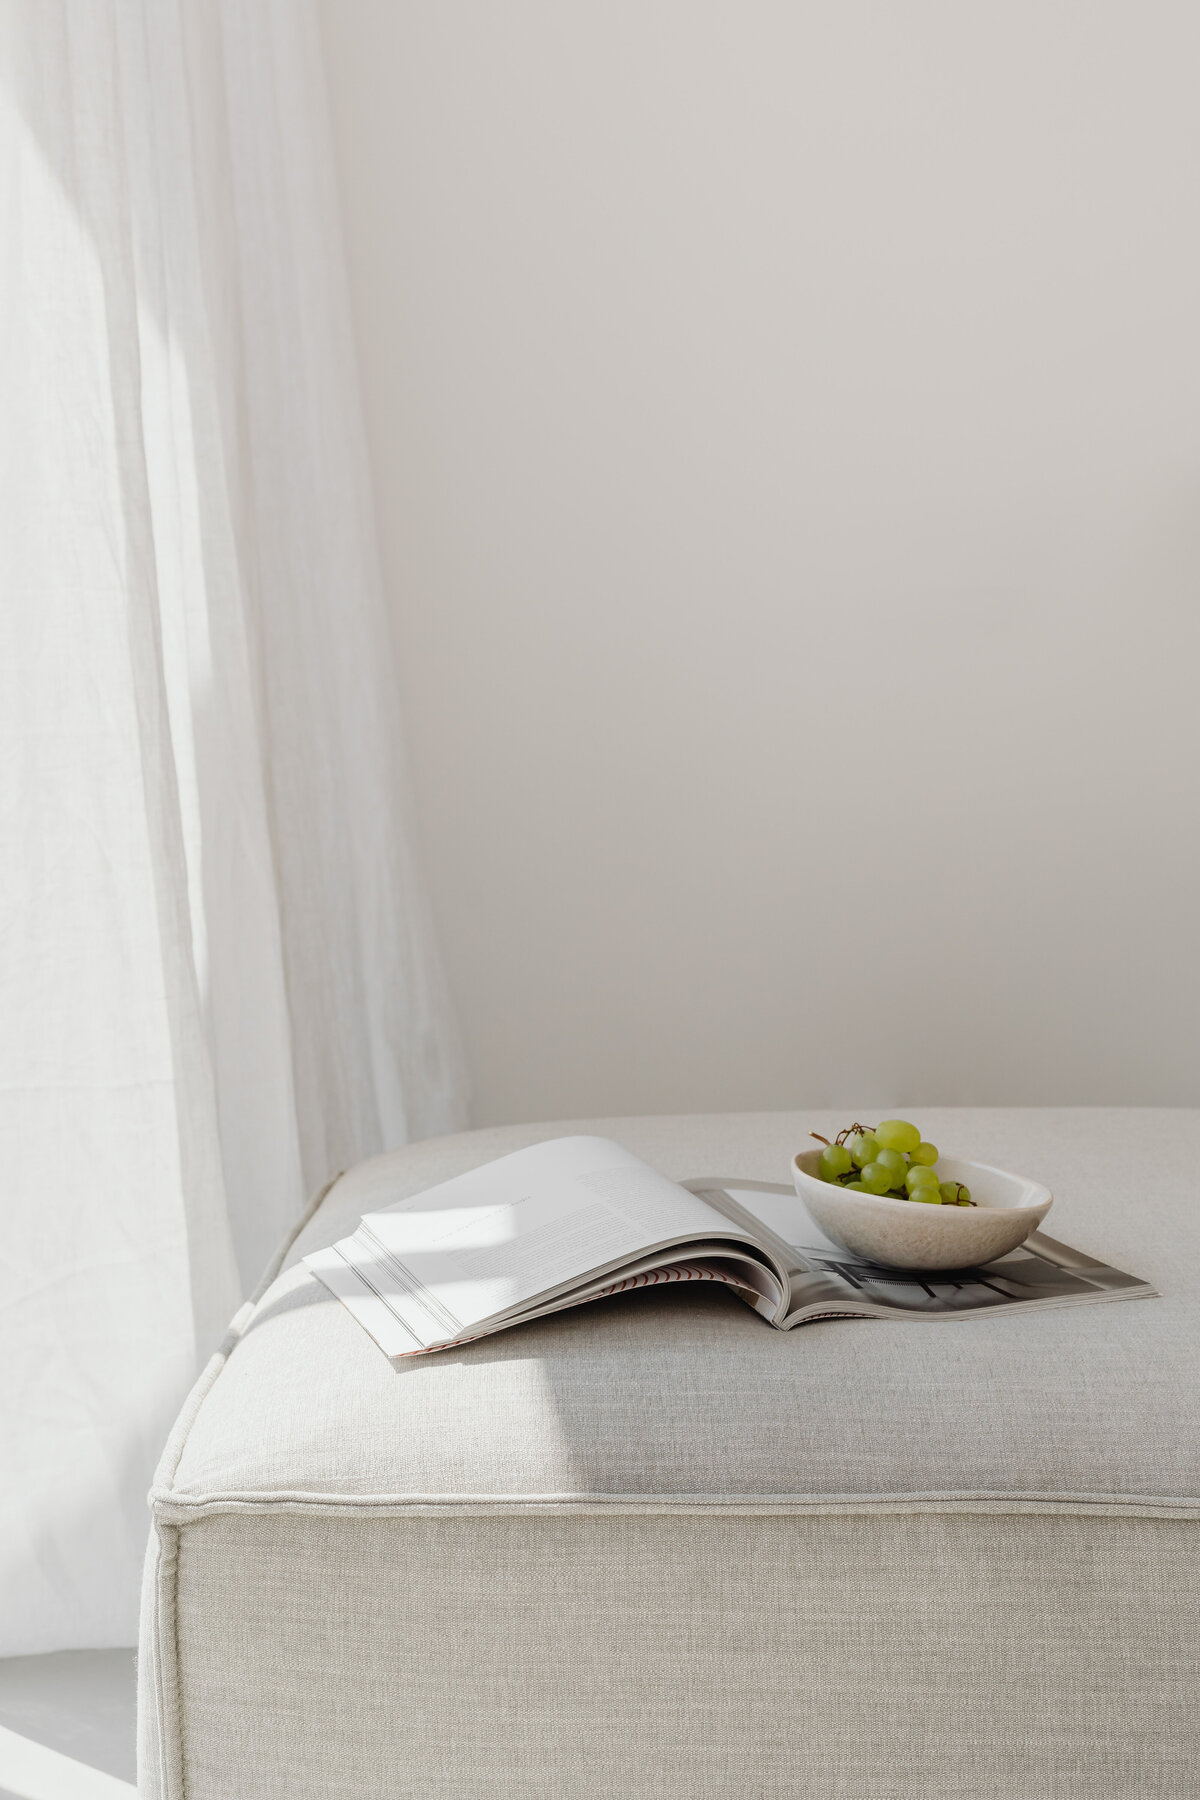 kaboompics_magazine-and-grapes-in-a-bowl-on-a-linen-couch-26946